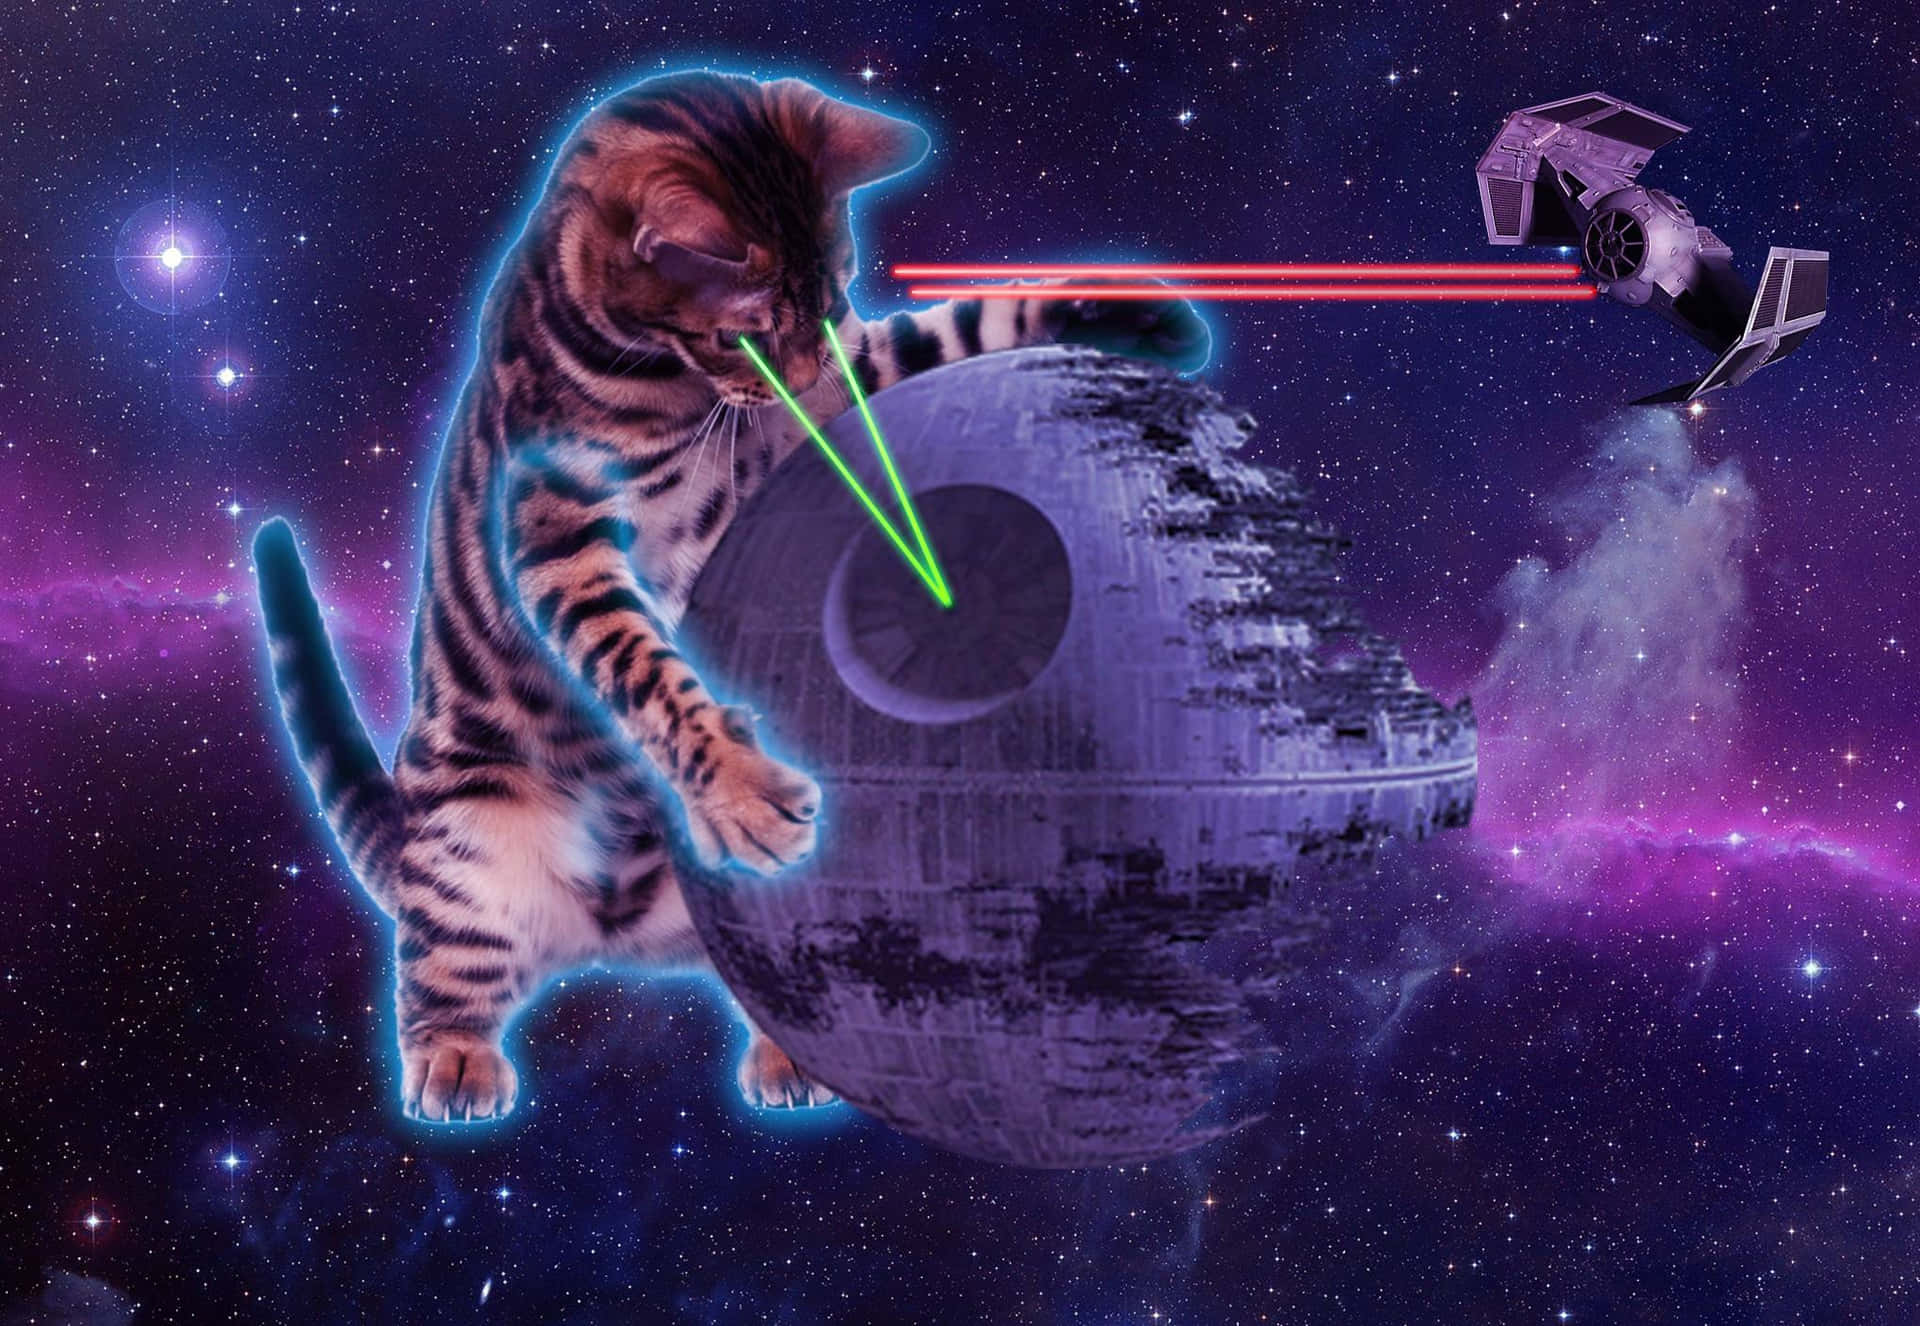 "Kitty takes a trip to the outer reaches of the Universe" Wallpaper